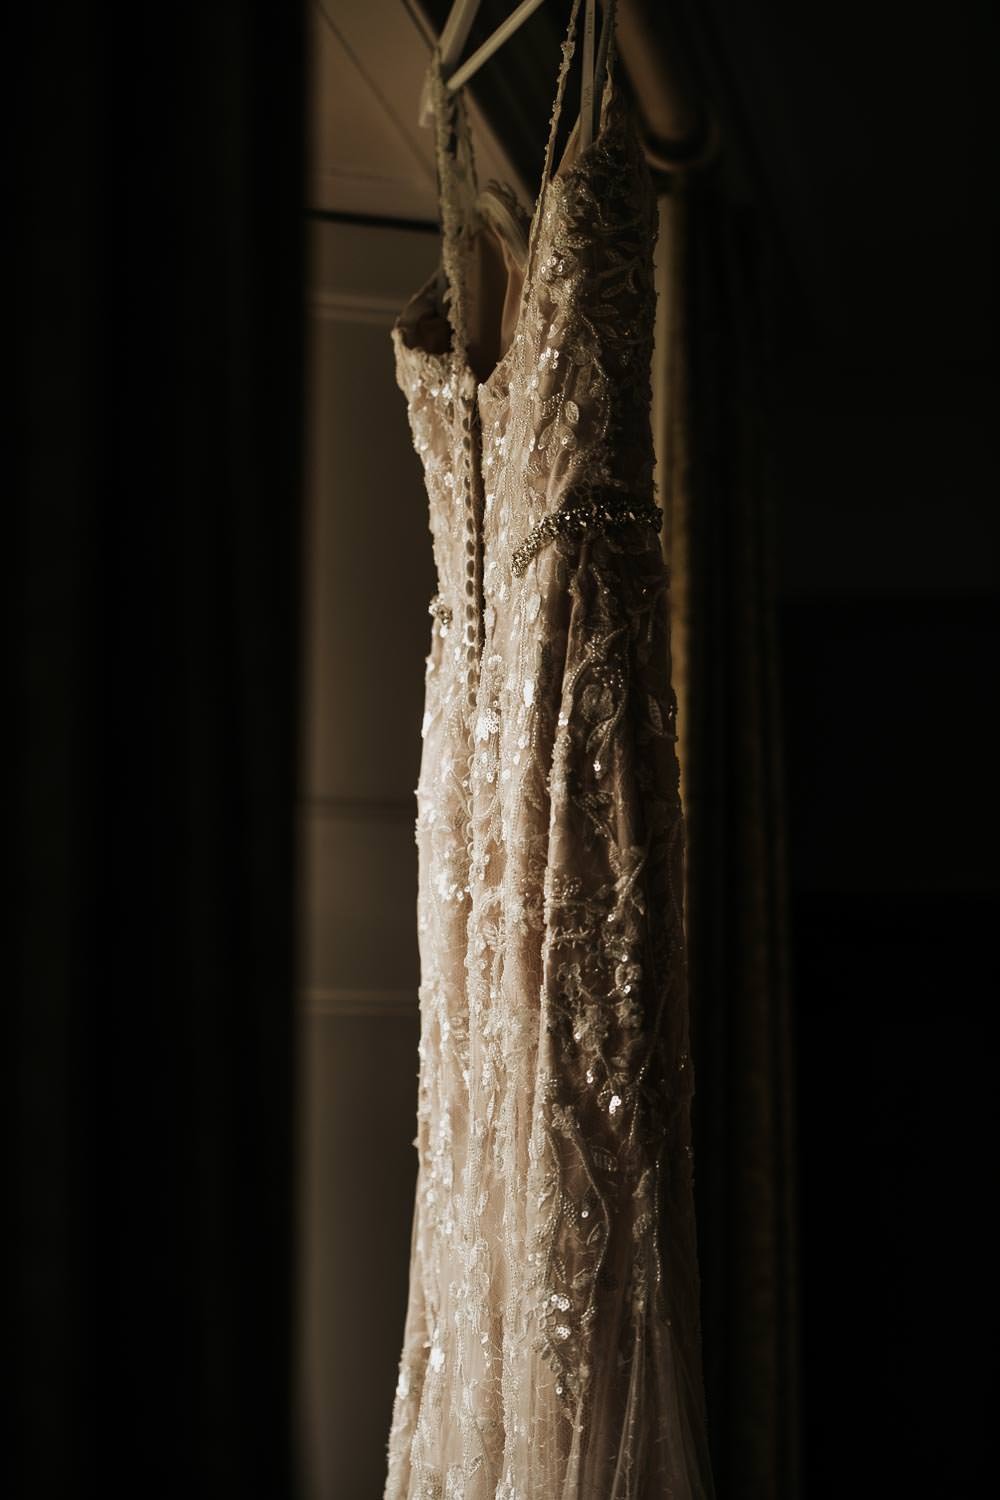 Lace wedding dress hanging in the window sunlight 